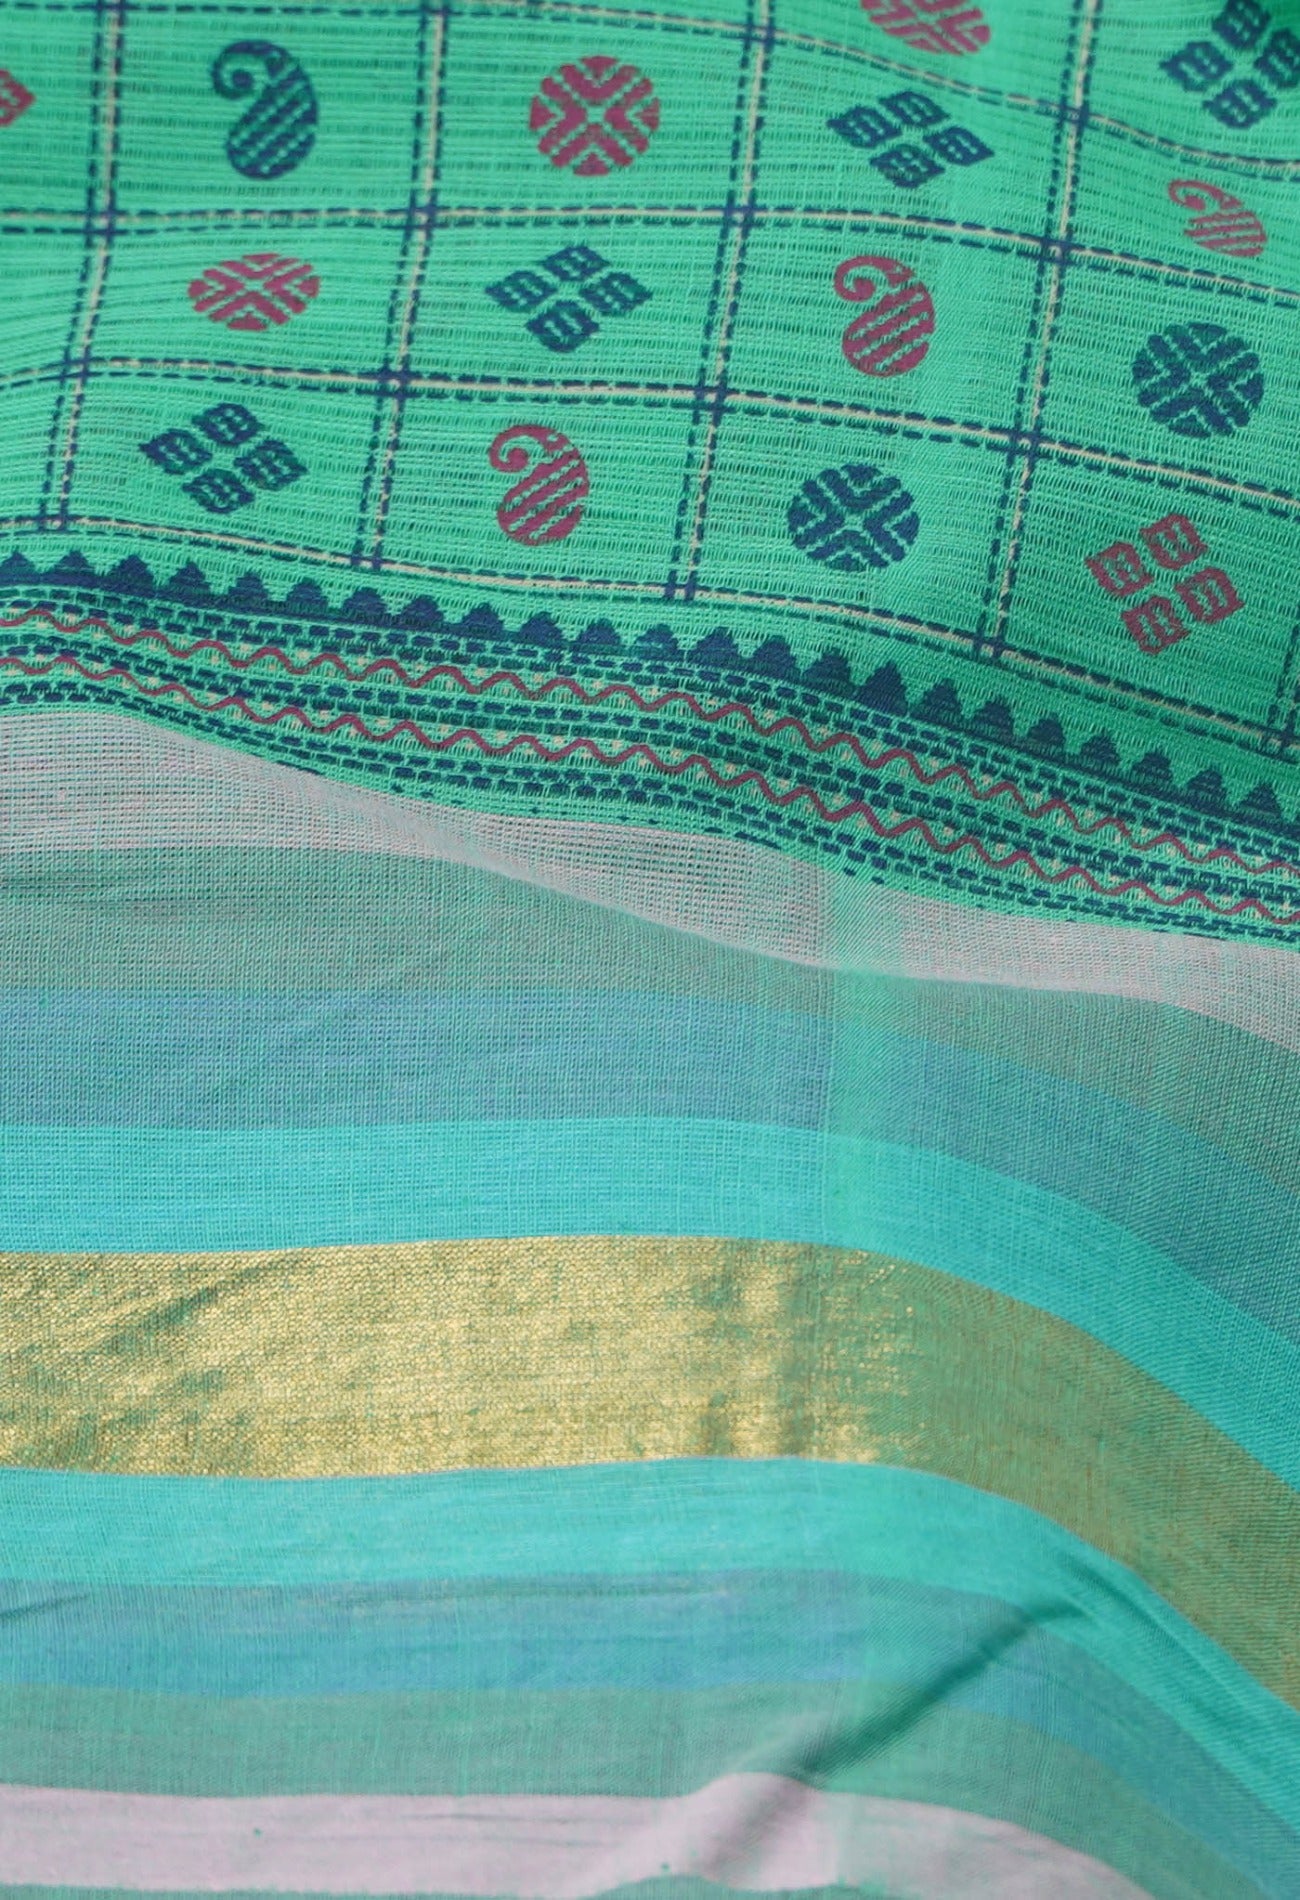 Online Shopping for Green Pure Hand Block Printed Cotton Saree with Hand Block Prints from Andhra Pradesh at Unnatisilks.com India
